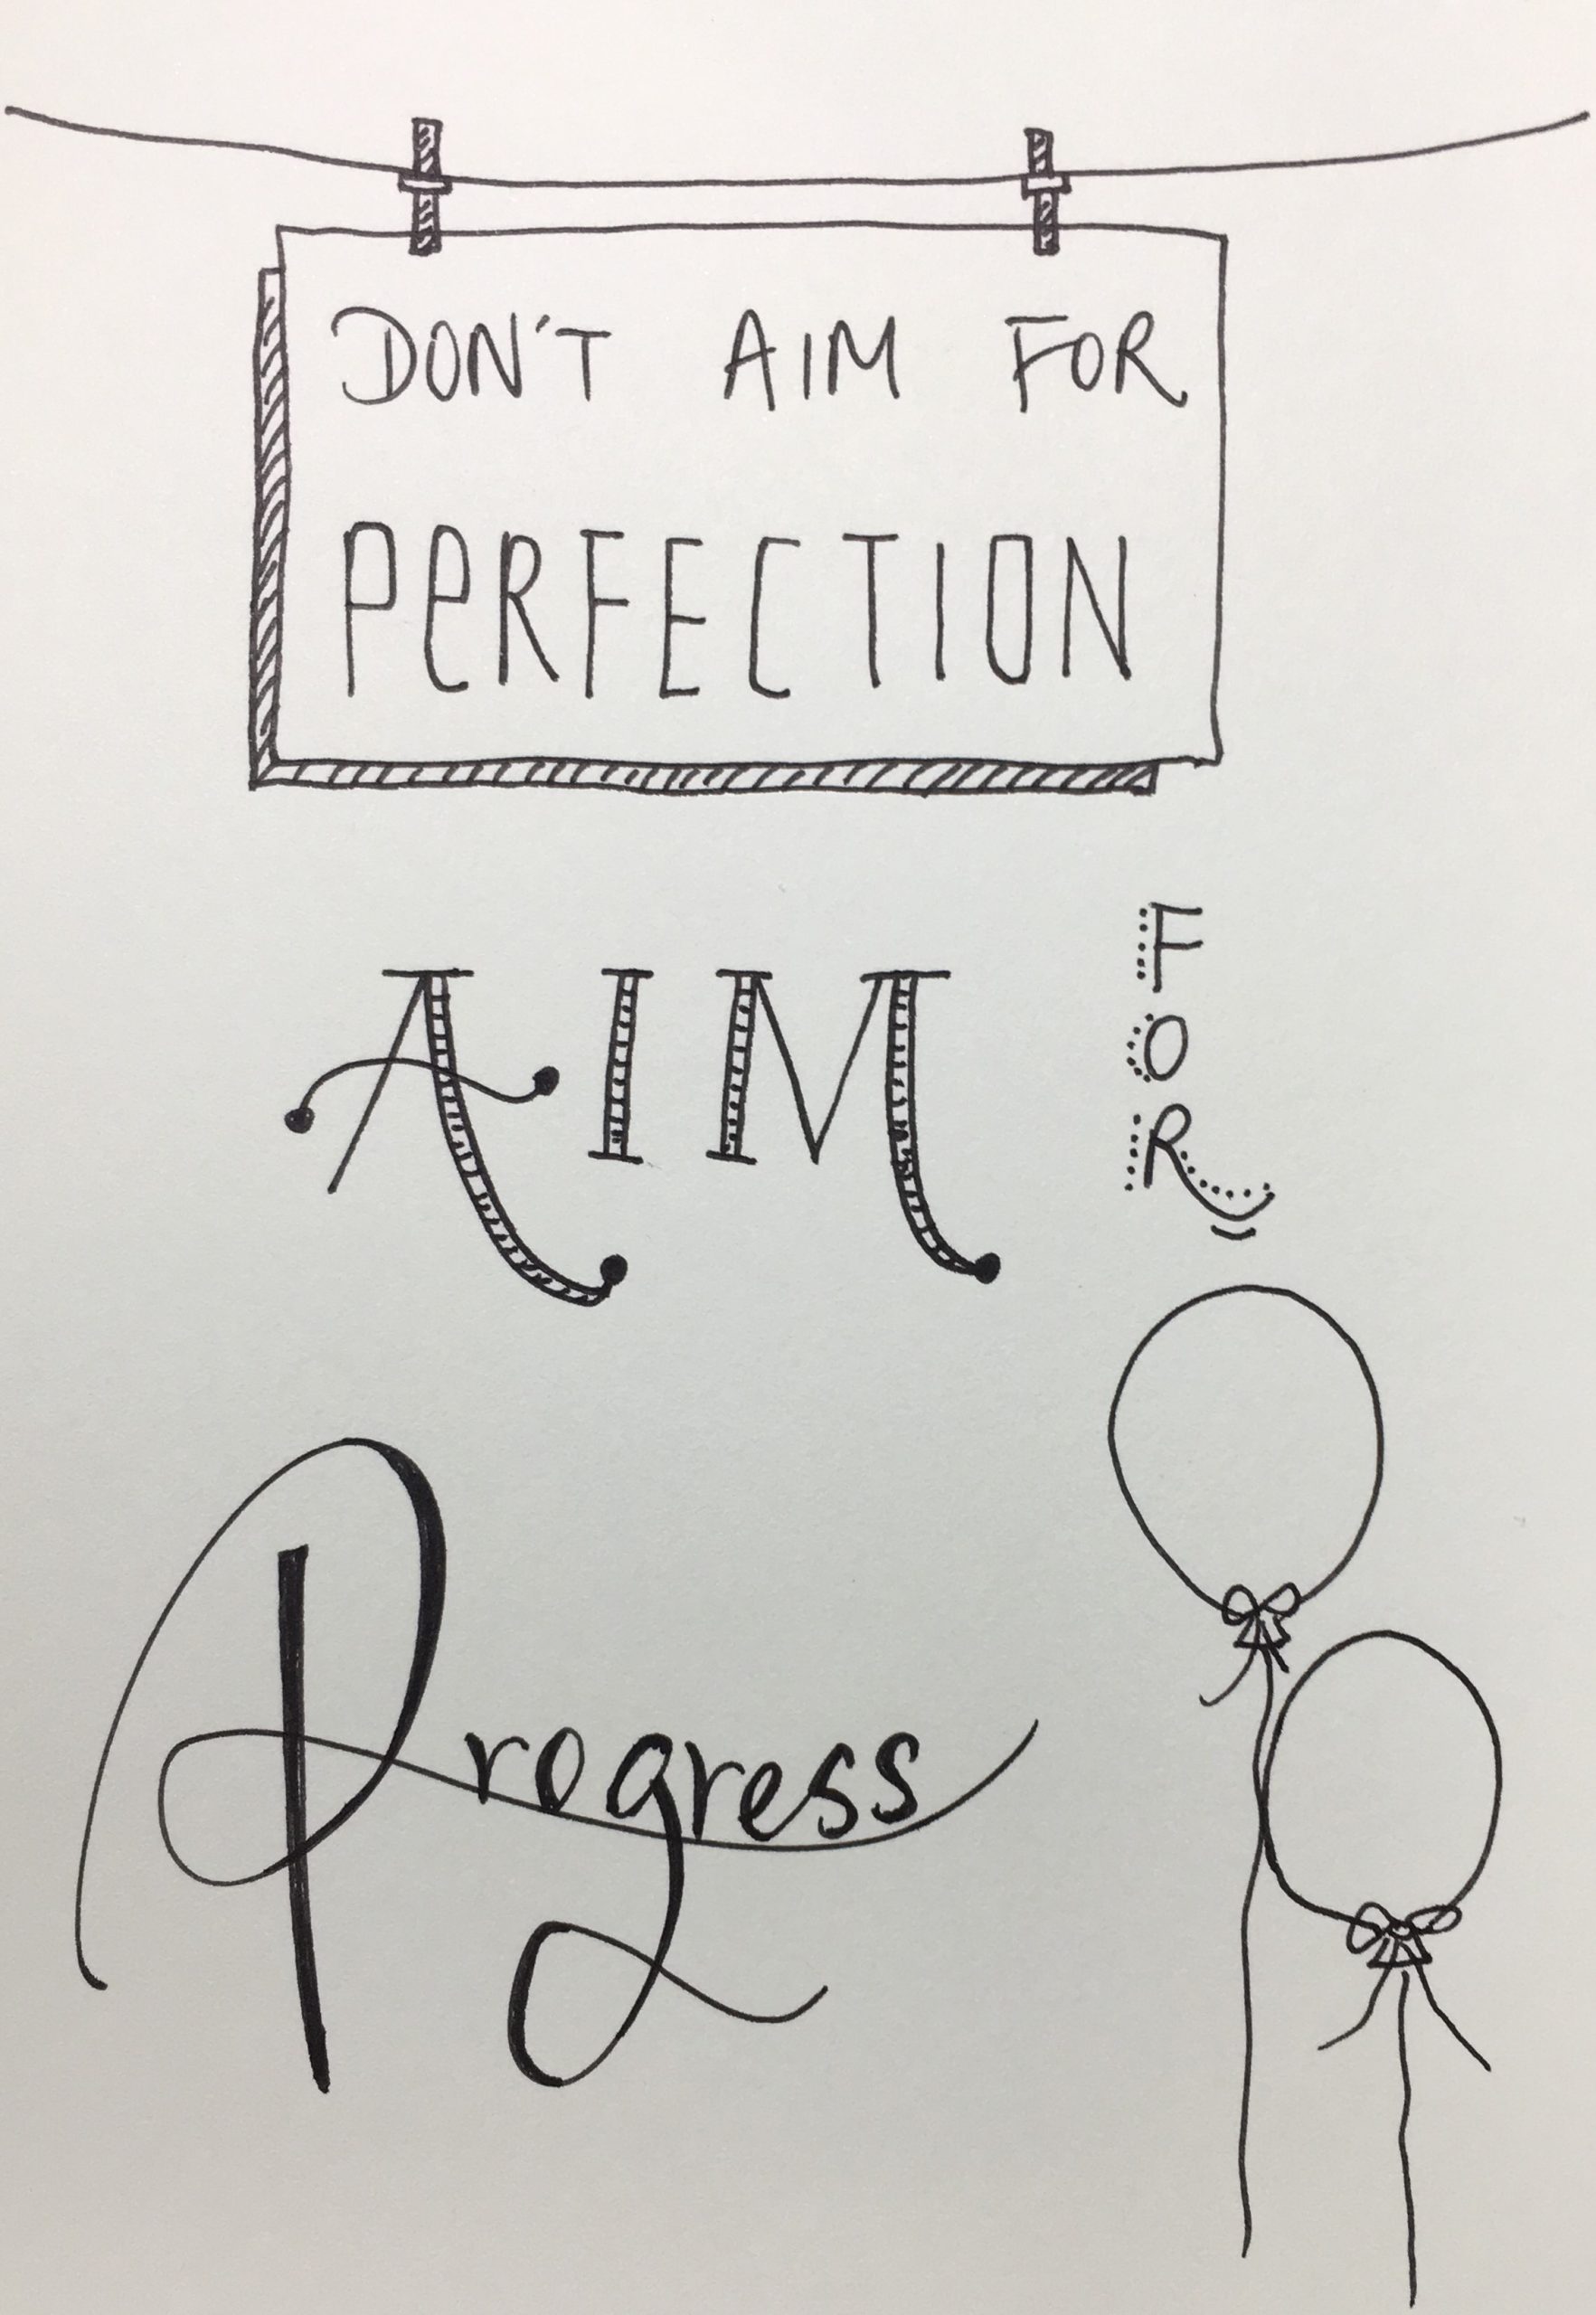 Don't Aim For Perfection. Aim For Progress.